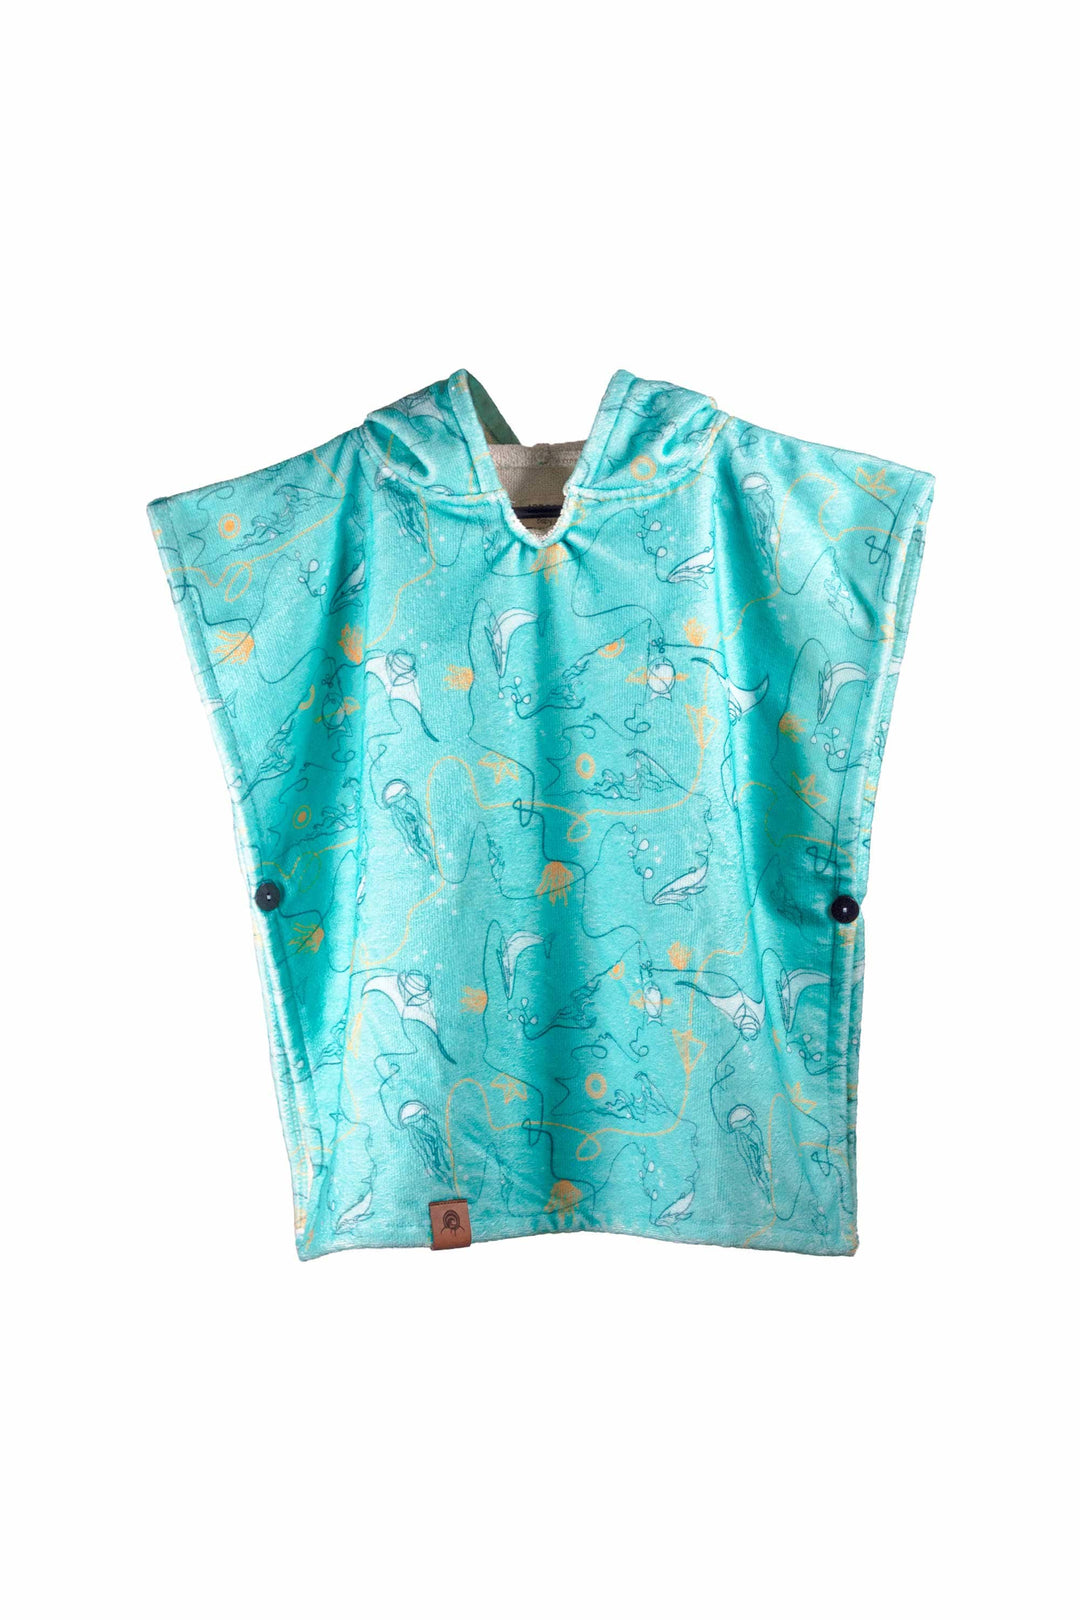 ABSRB Ponchos Kids Surf poncho OCEANO WHALES kids